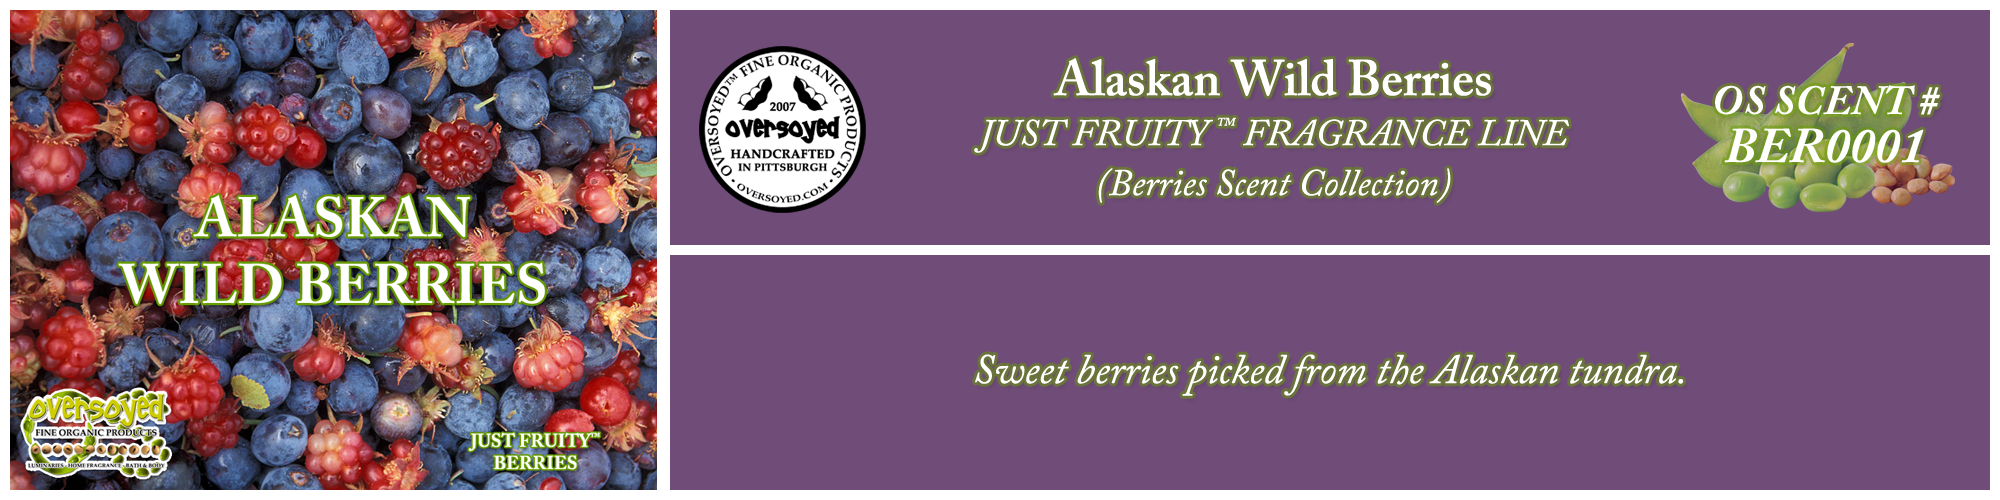 Alaskan Wild Berries Handcrafted Products Collection